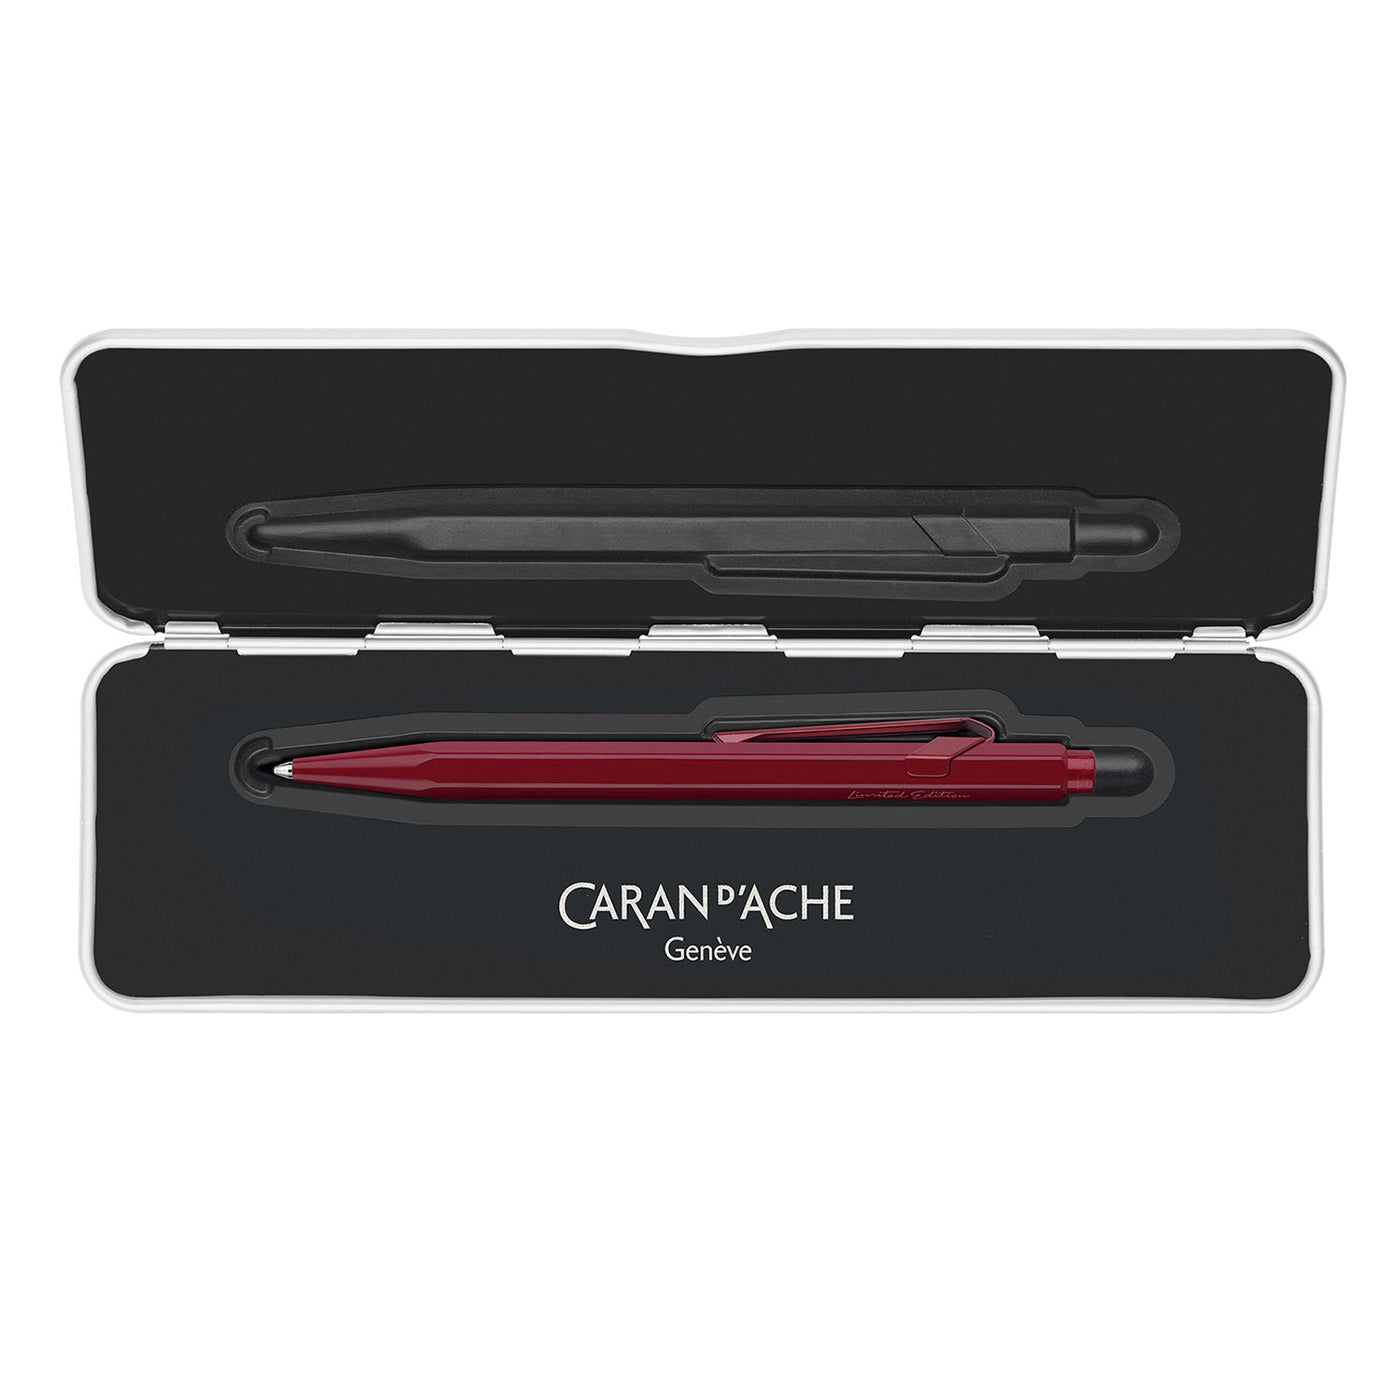 Caran d'Ache 849 Claim Your Style Ball Pen - Garnet Red (Limited Edition) 4